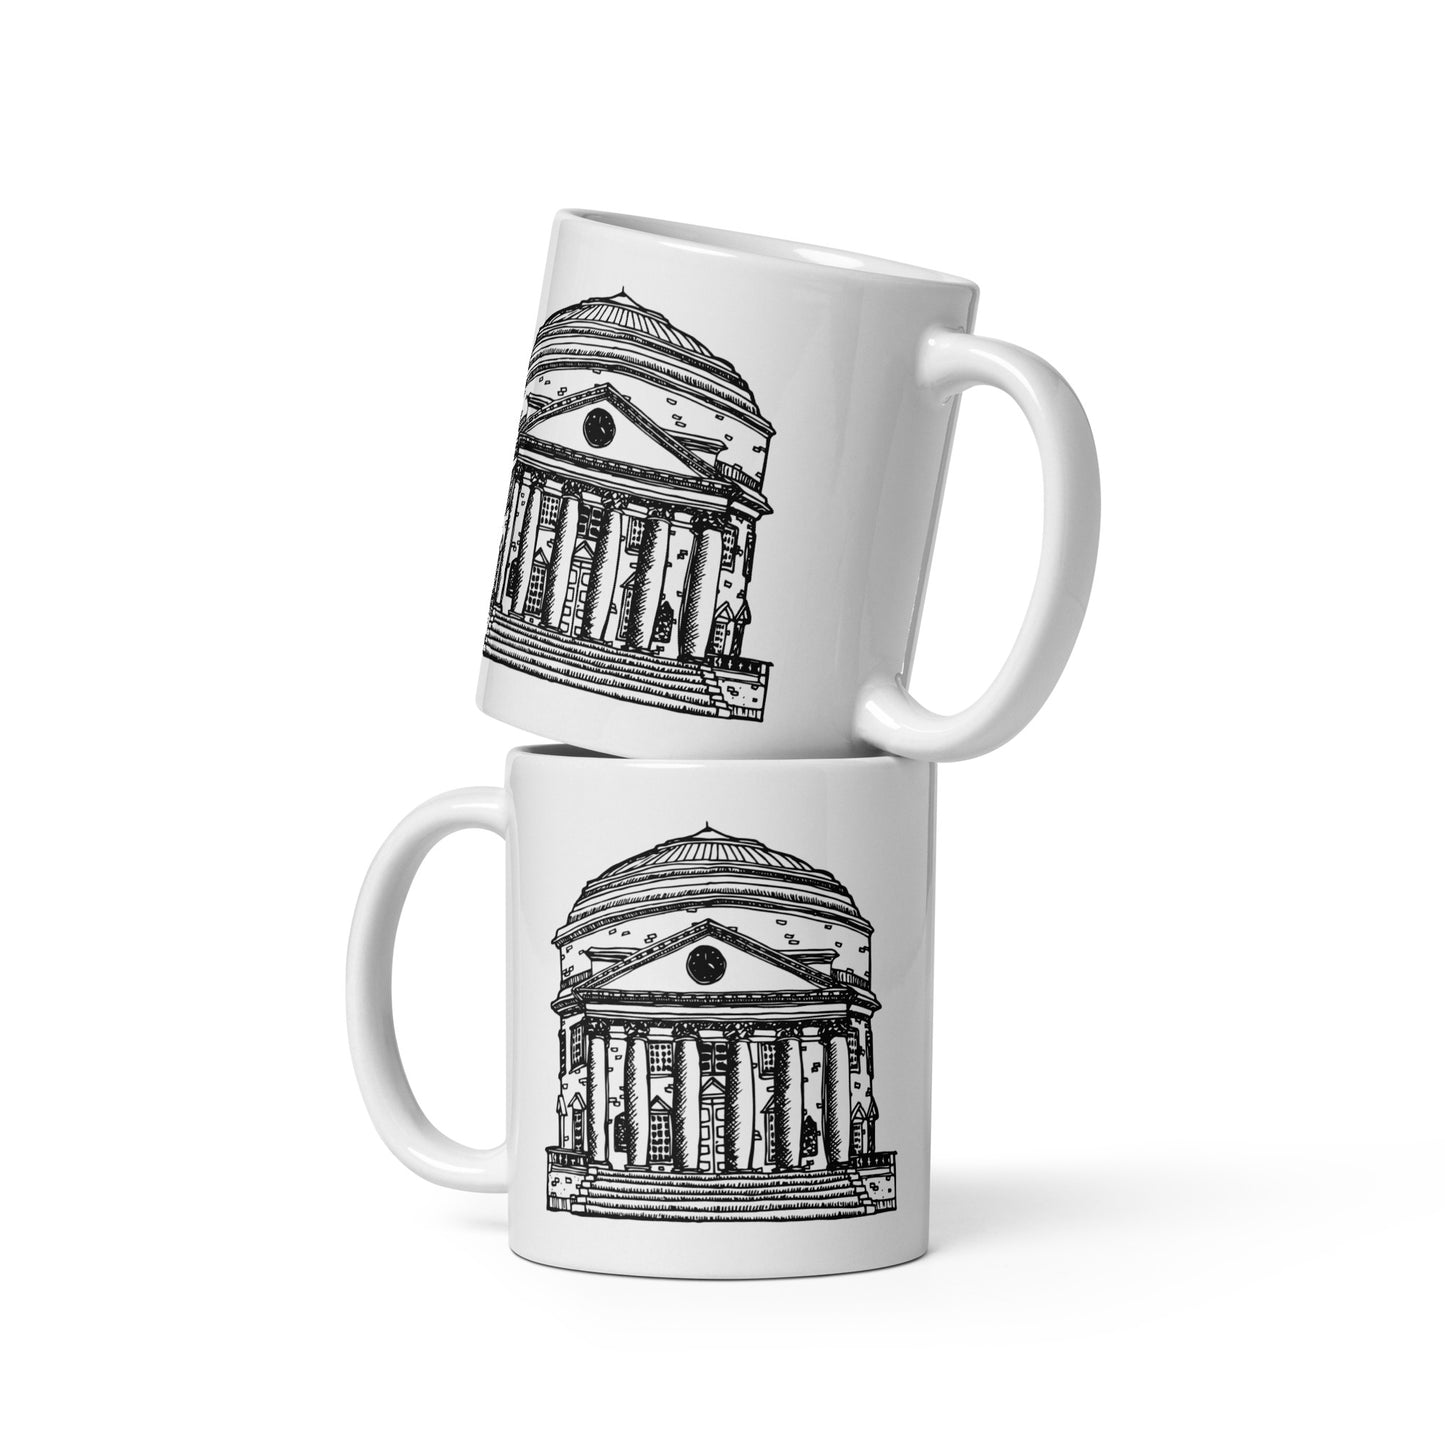 BellavanceInk: 11 Oz White Coffee Mug With Pen And Ink Drawing Of The Rotunda At the University Of Virginia (Officially Licensed)